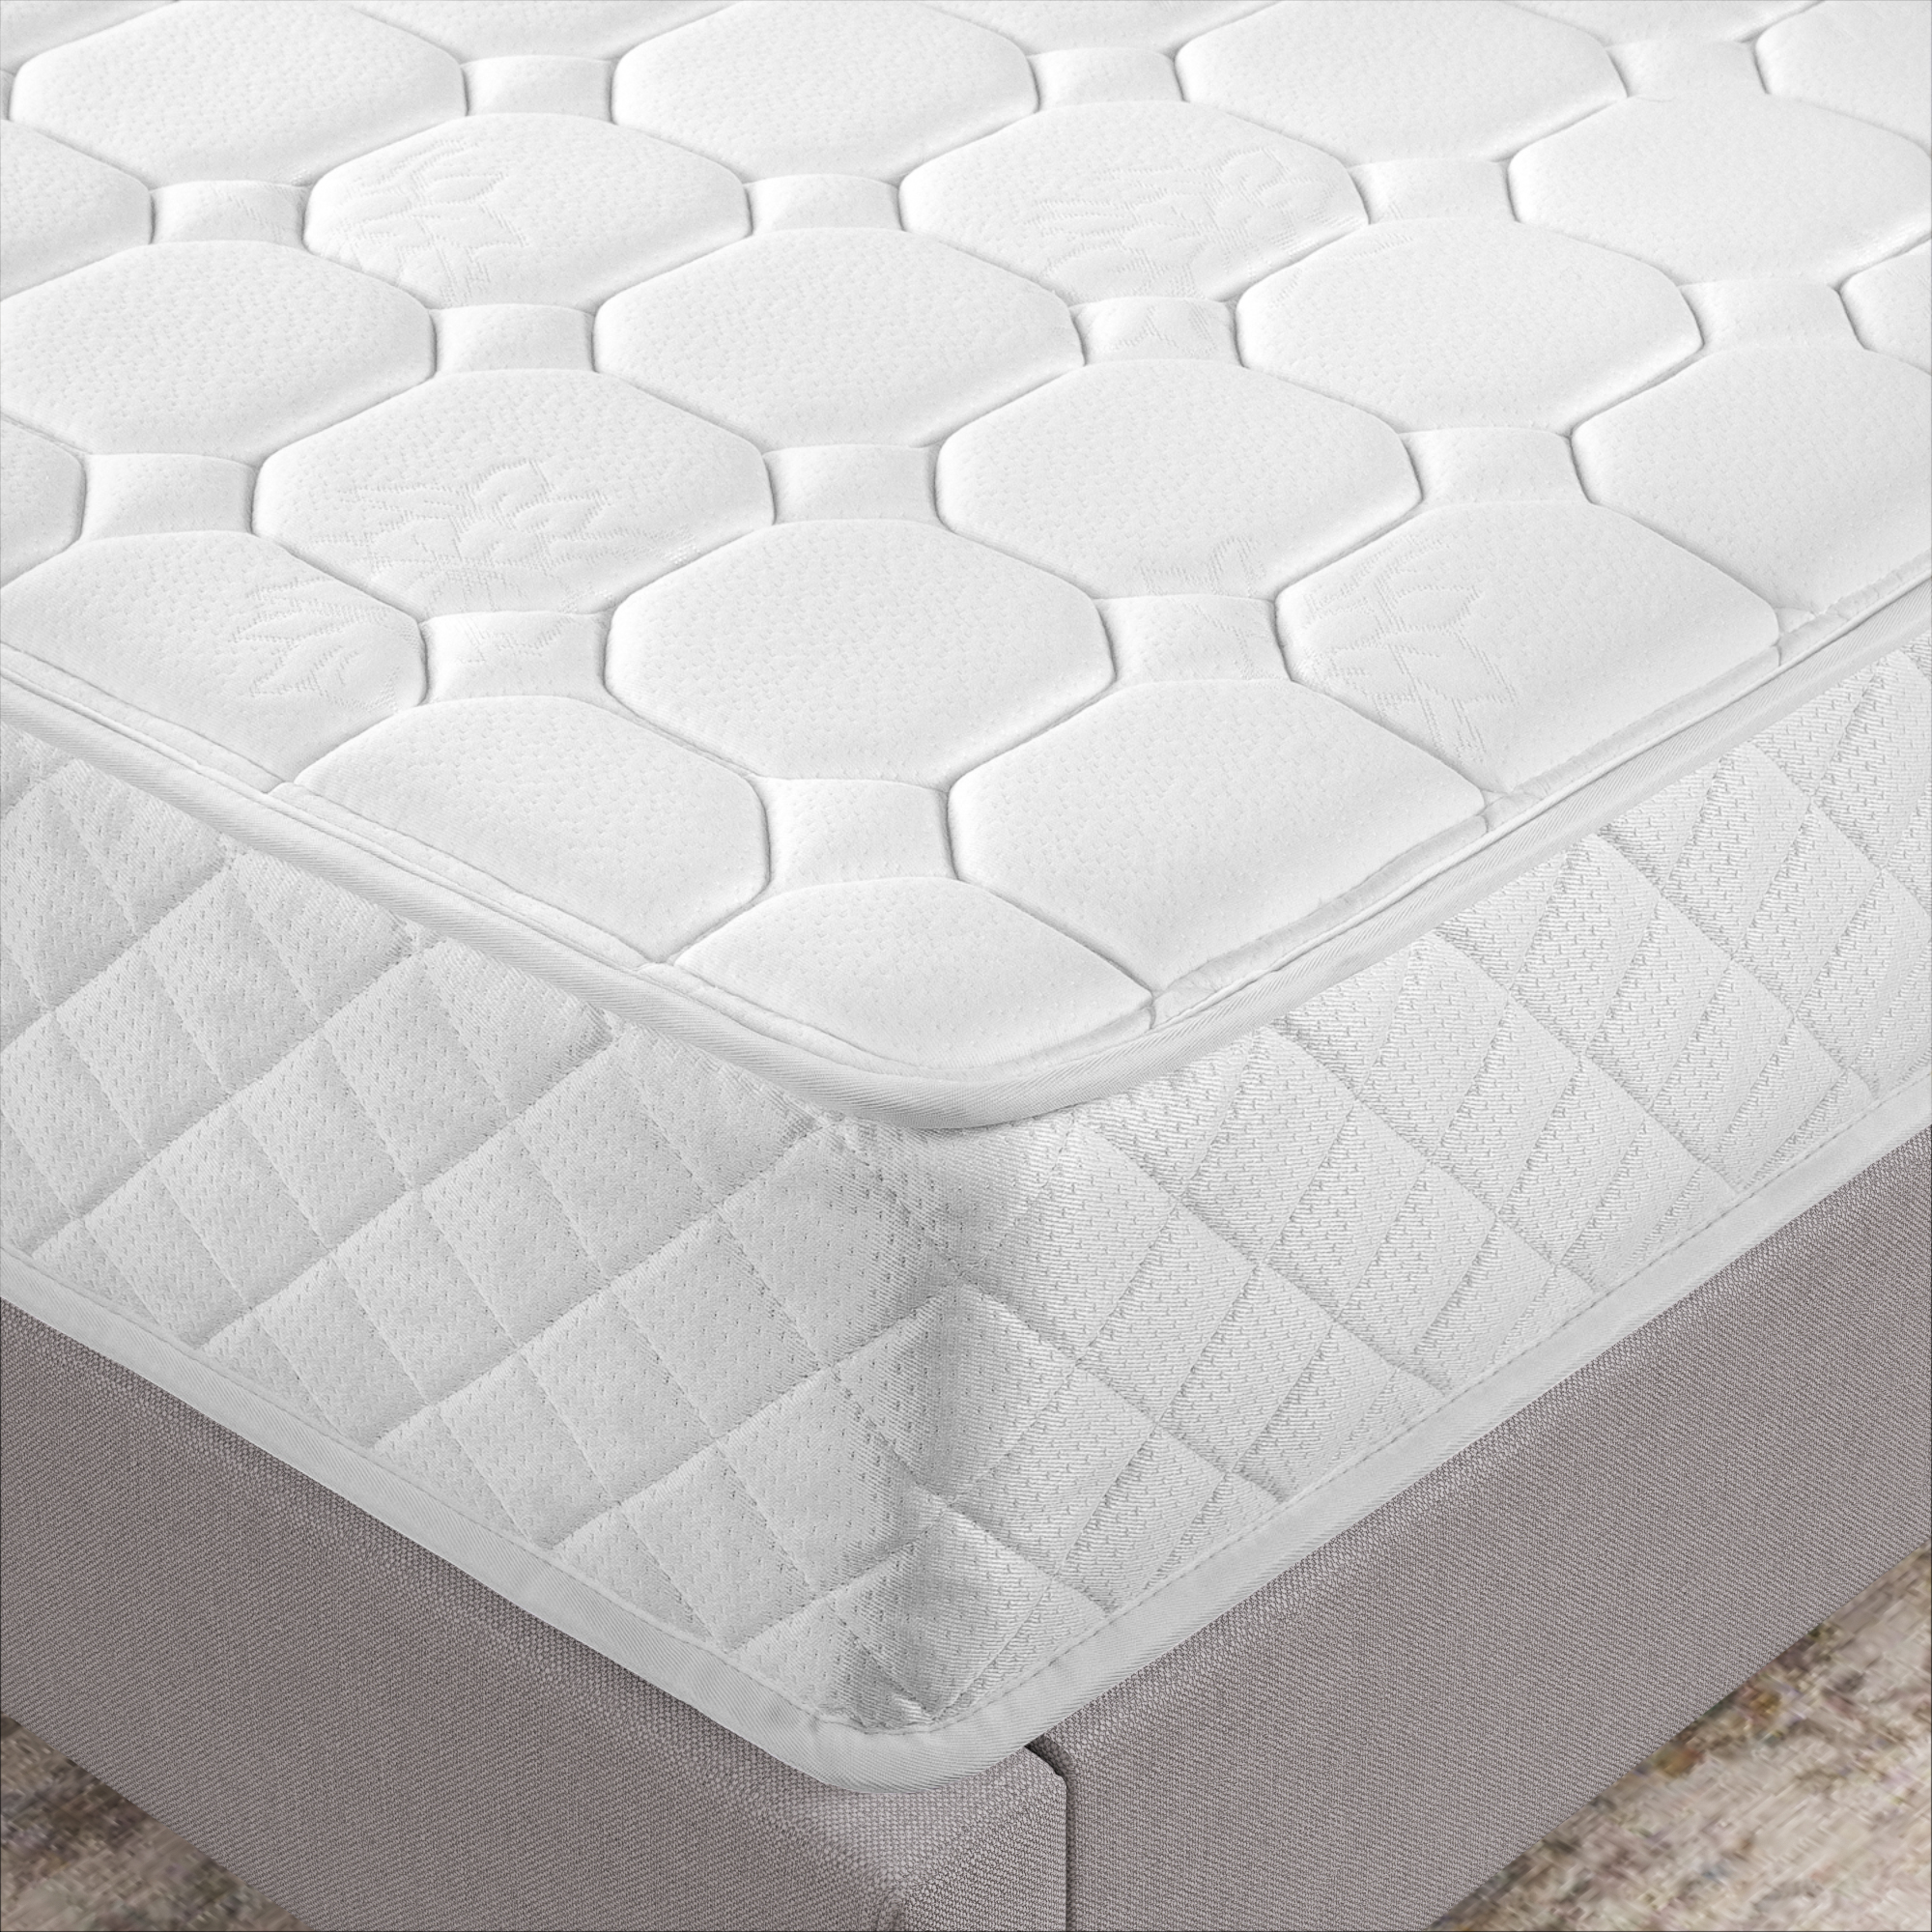 8" Quilted Hybrid of Comfort Foam and Pocket Spring Mattress, Full - image 5 of 5